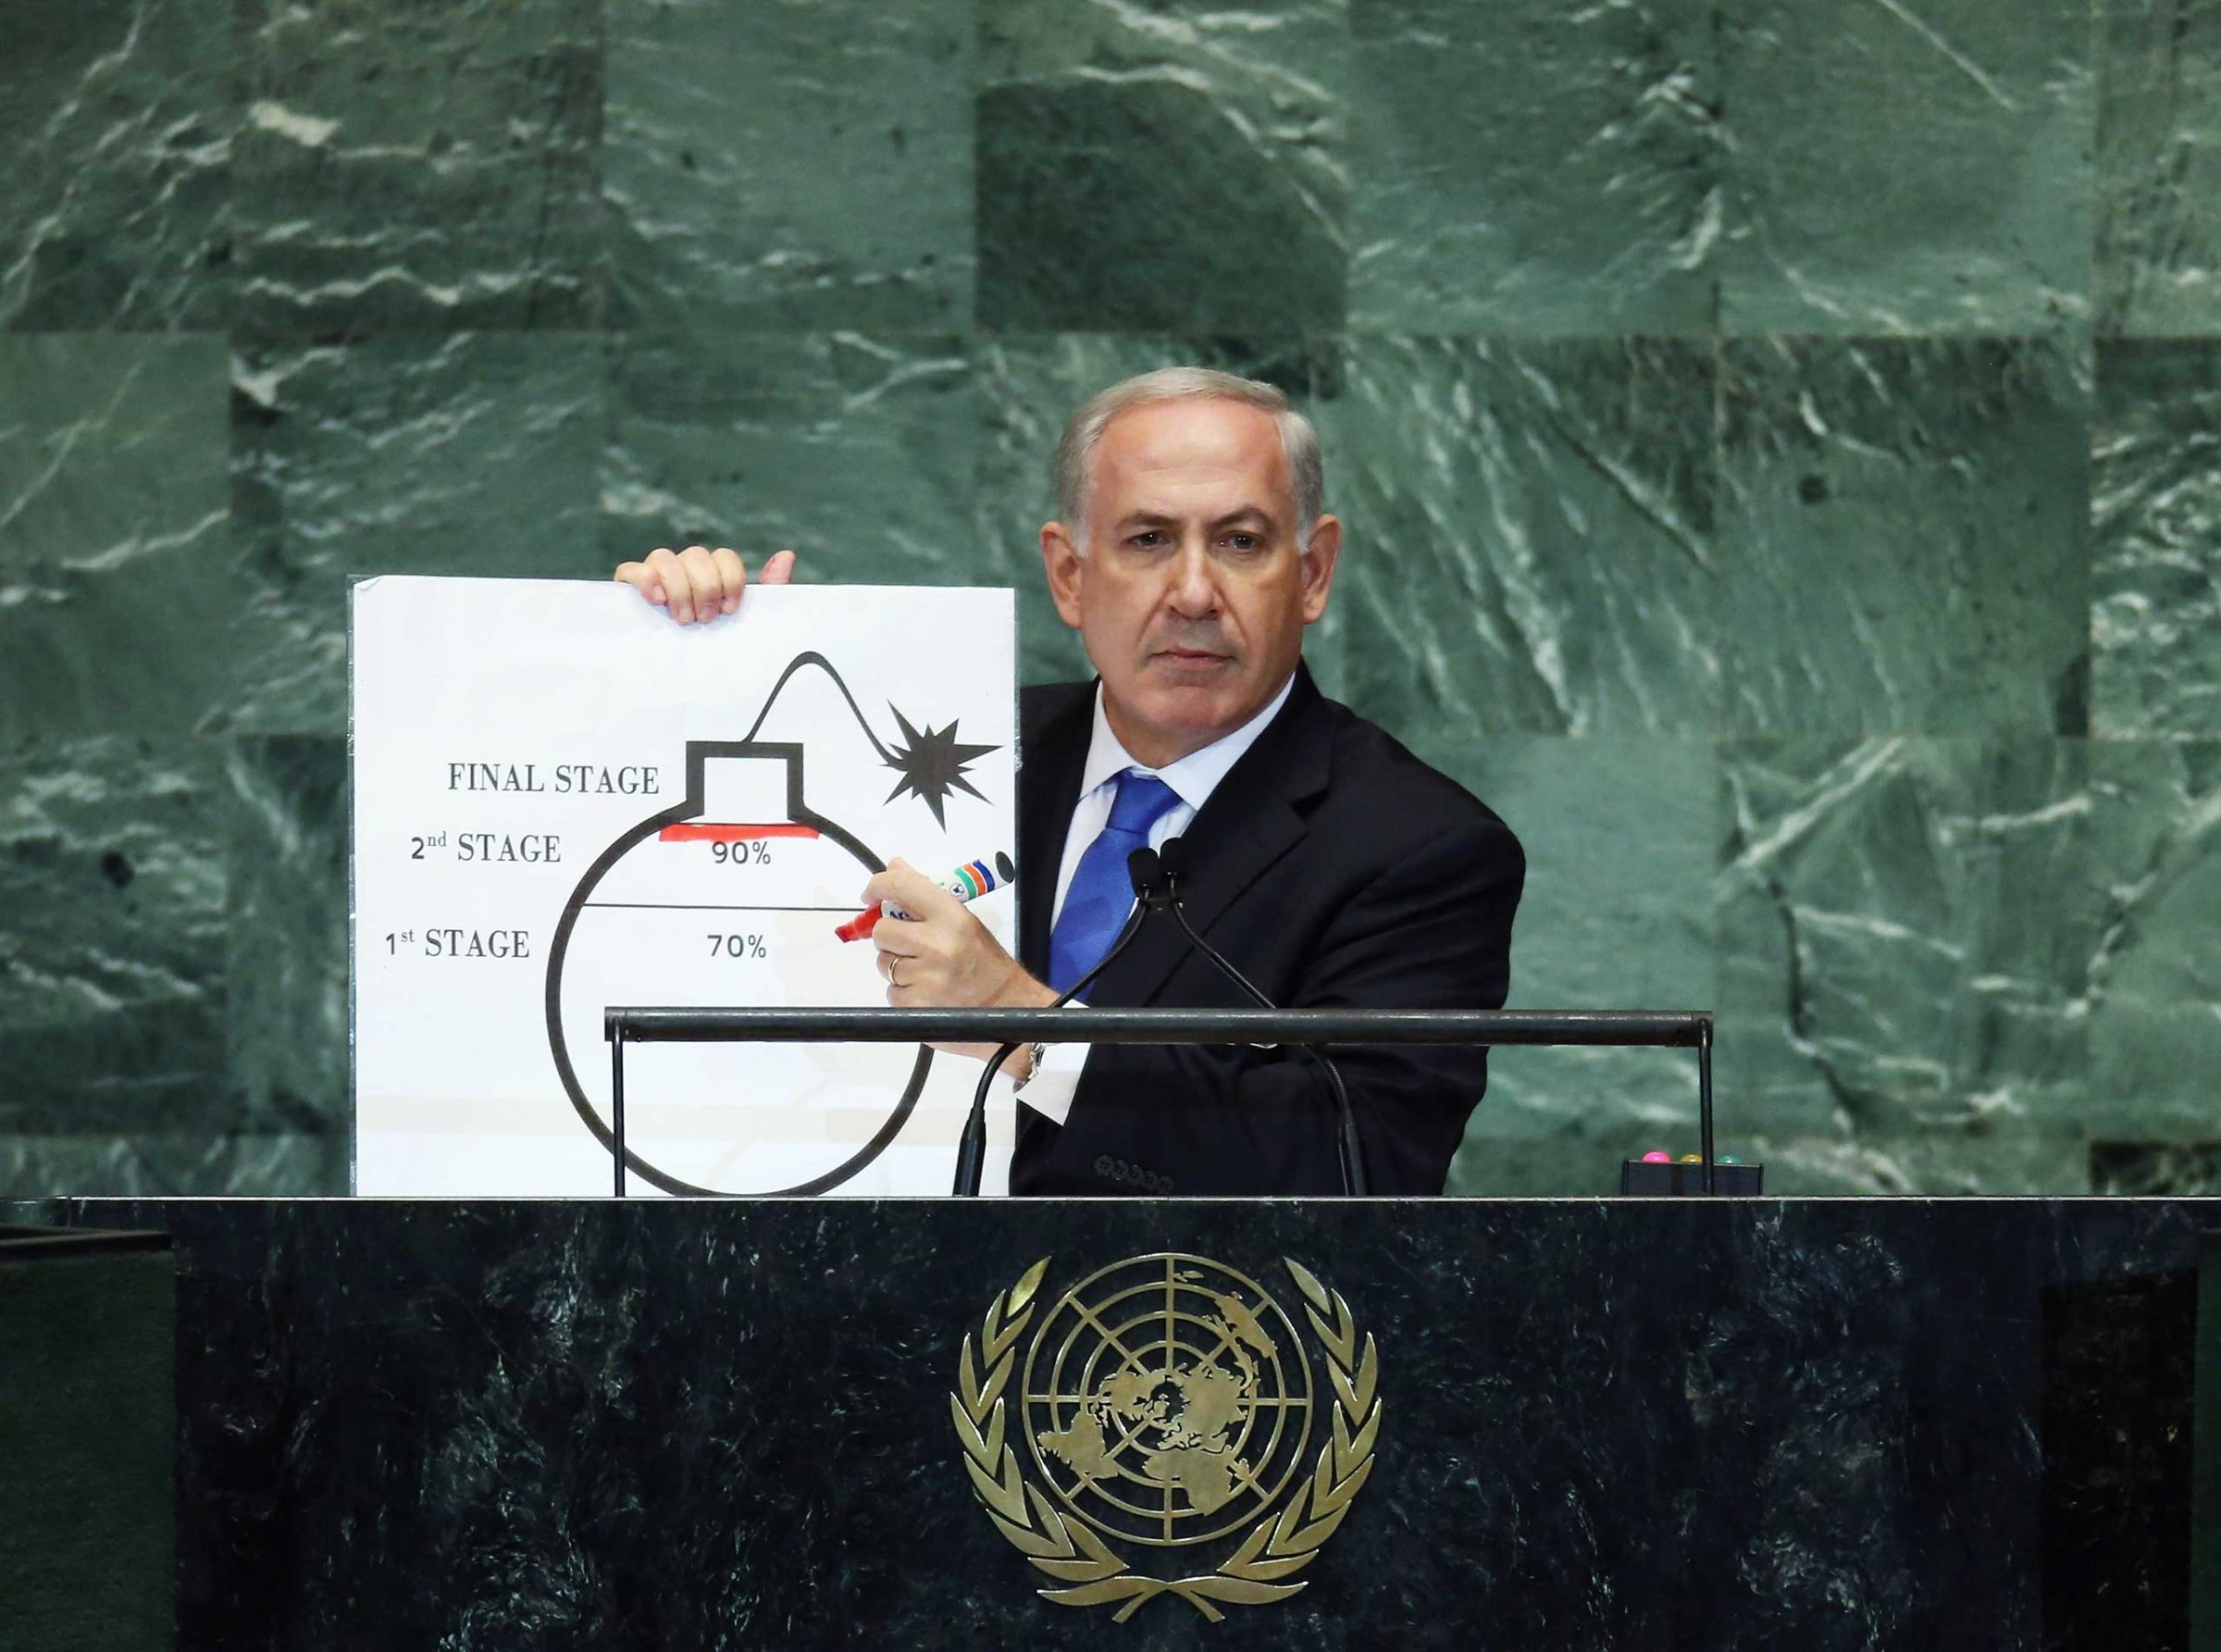 Israel's Prime Minister Benjamin Netanyahu during an address to the United Nations General Assembly in 2011.